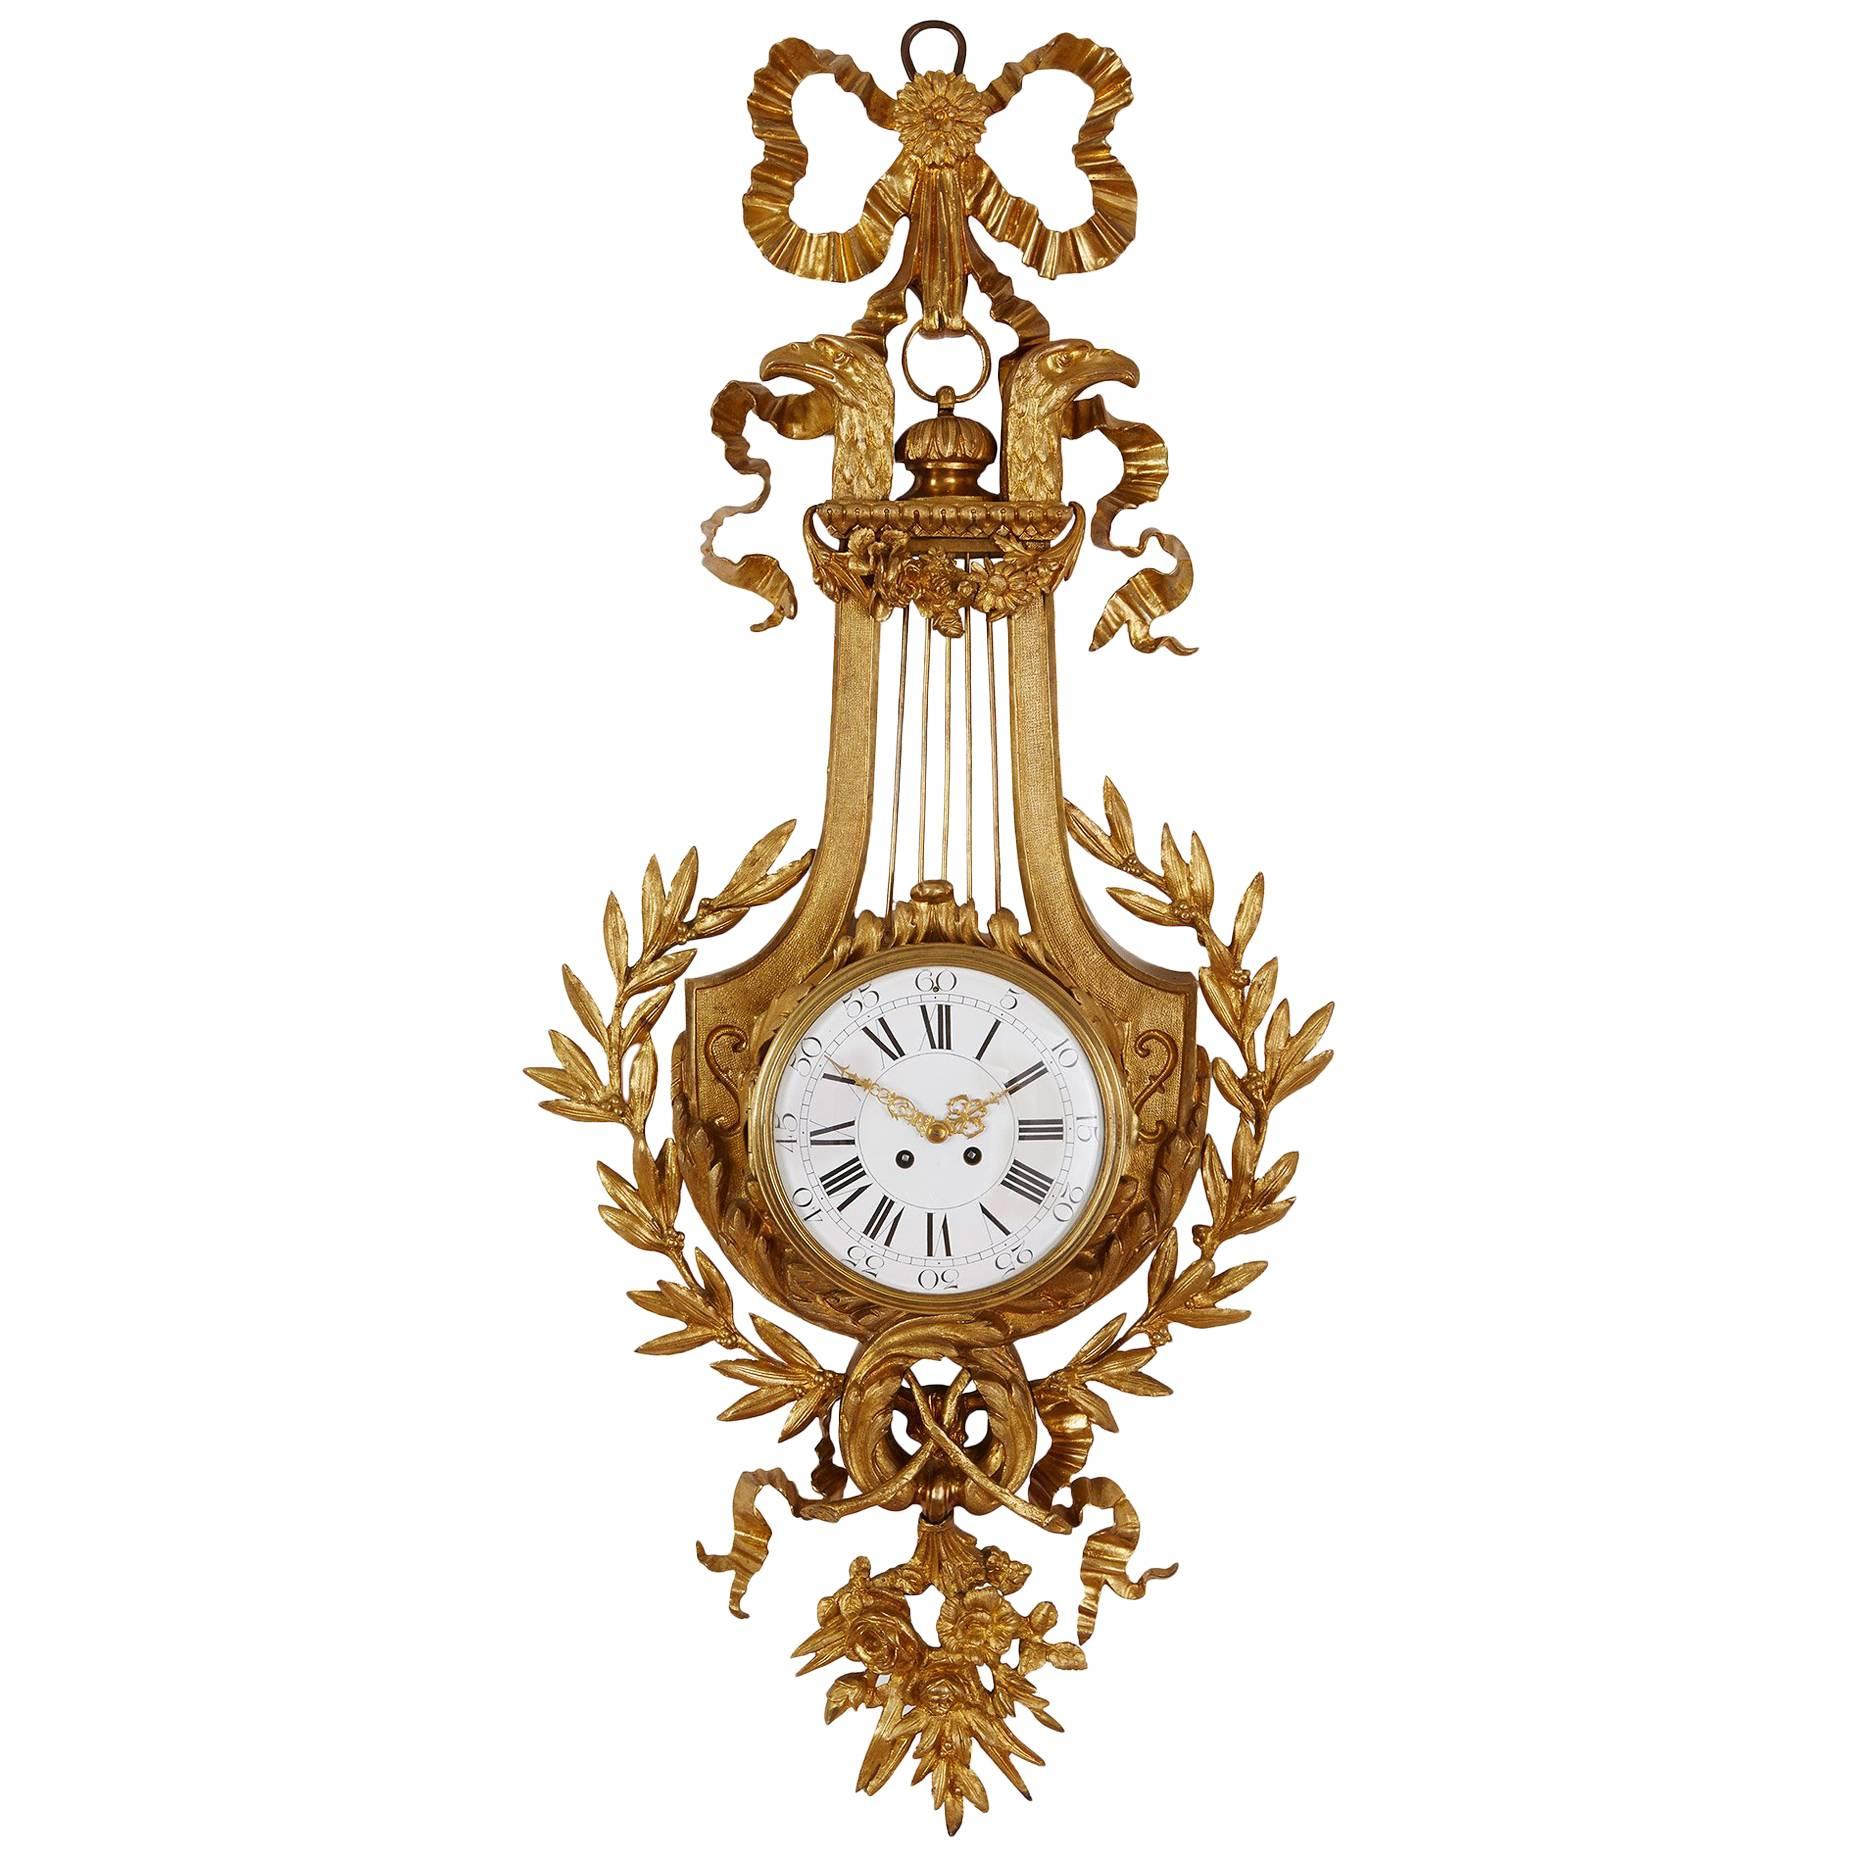 Neoclassical Style Gilt Bronze Cartel Cartel Clock with Lyre-Shaped Back Plate